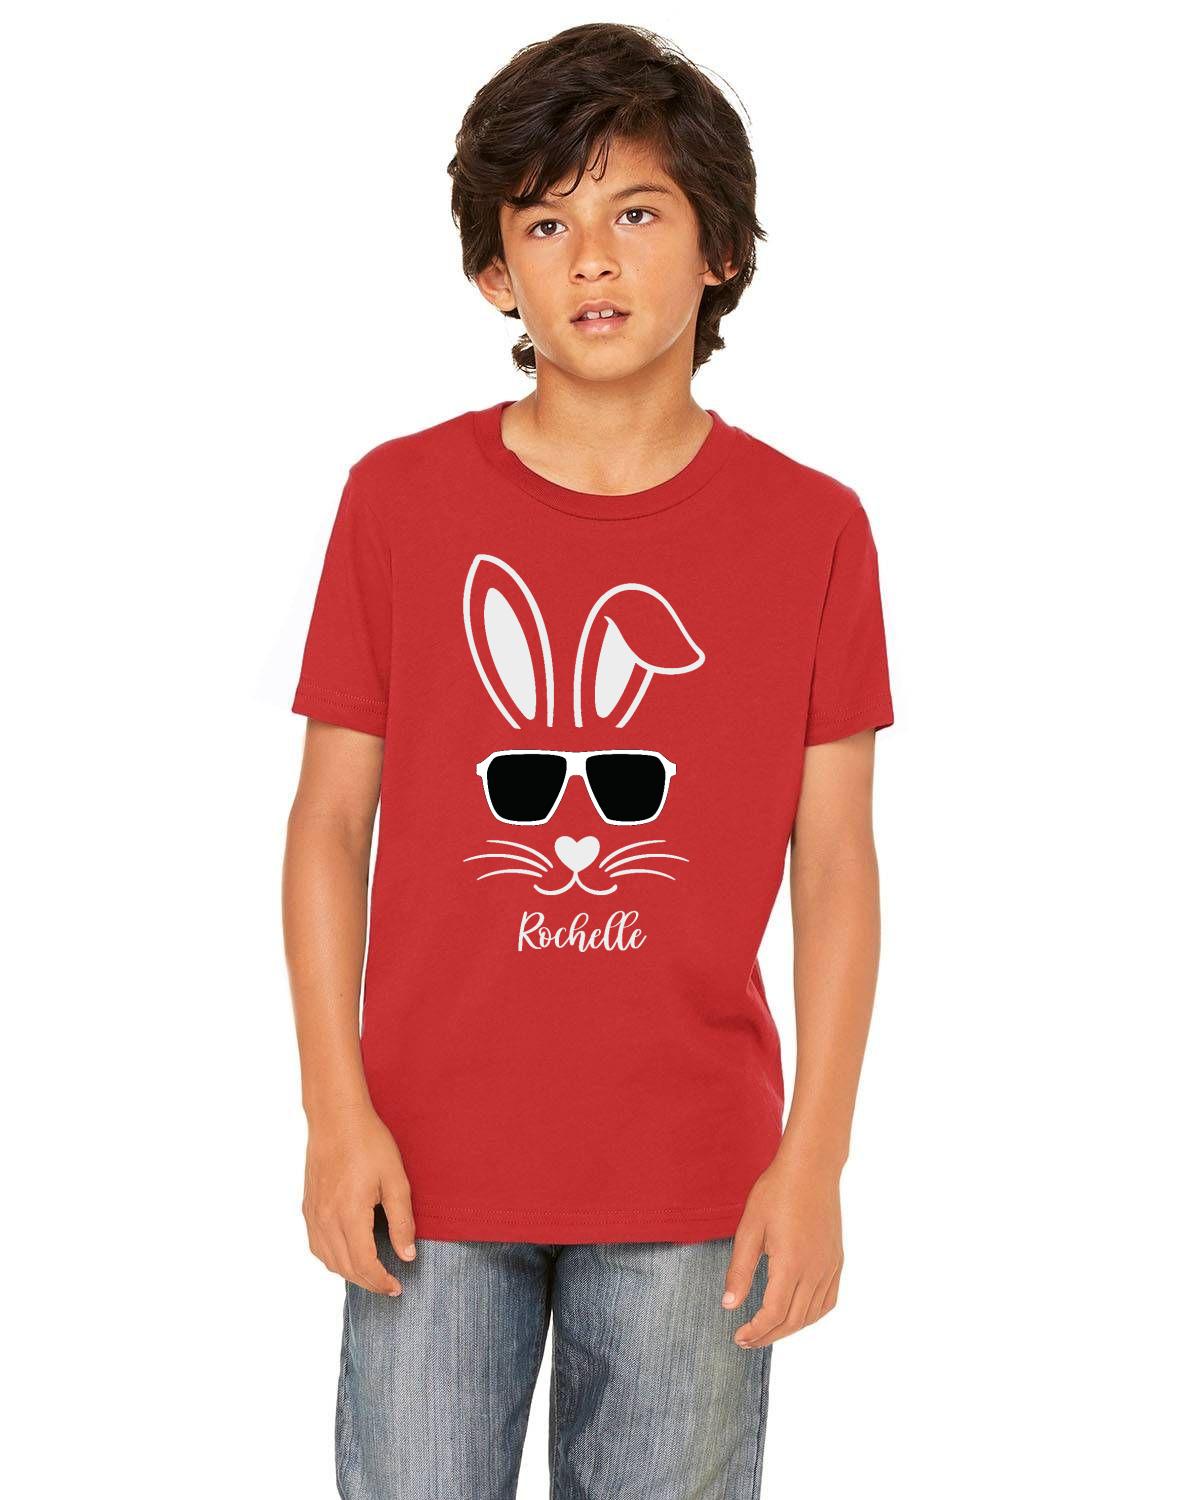 Personalised Named Youth Easter Jersey T-Shirt